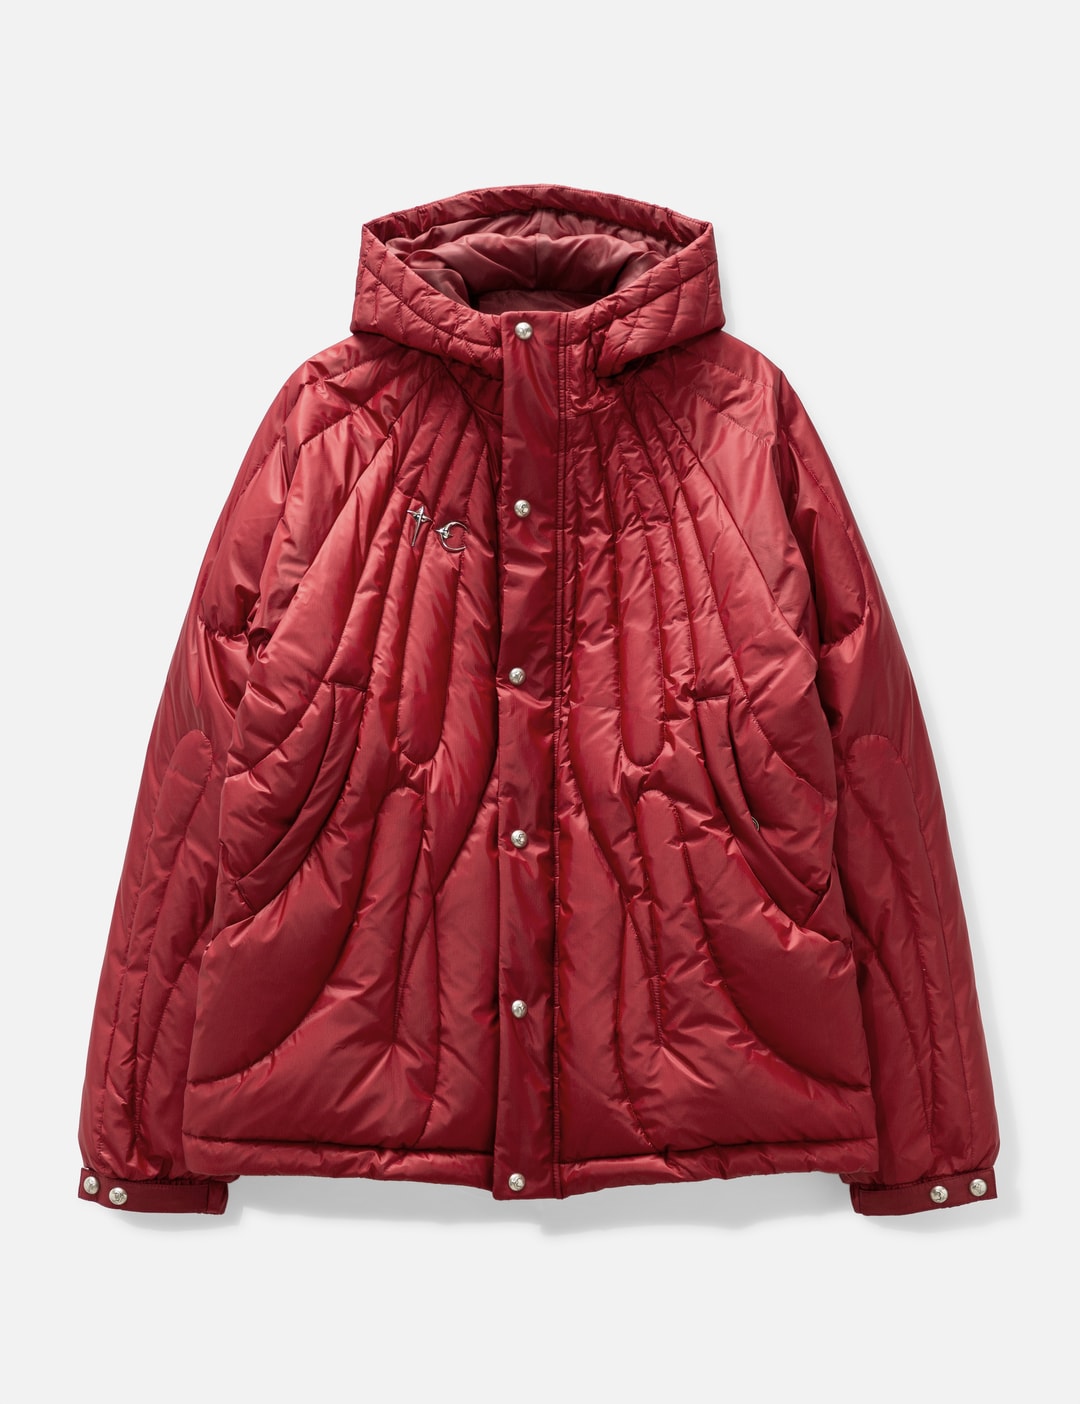 THUG CLUB - CAVE GOOSE DOWN JACKET | HBX - Globally Curated Fashion and ...